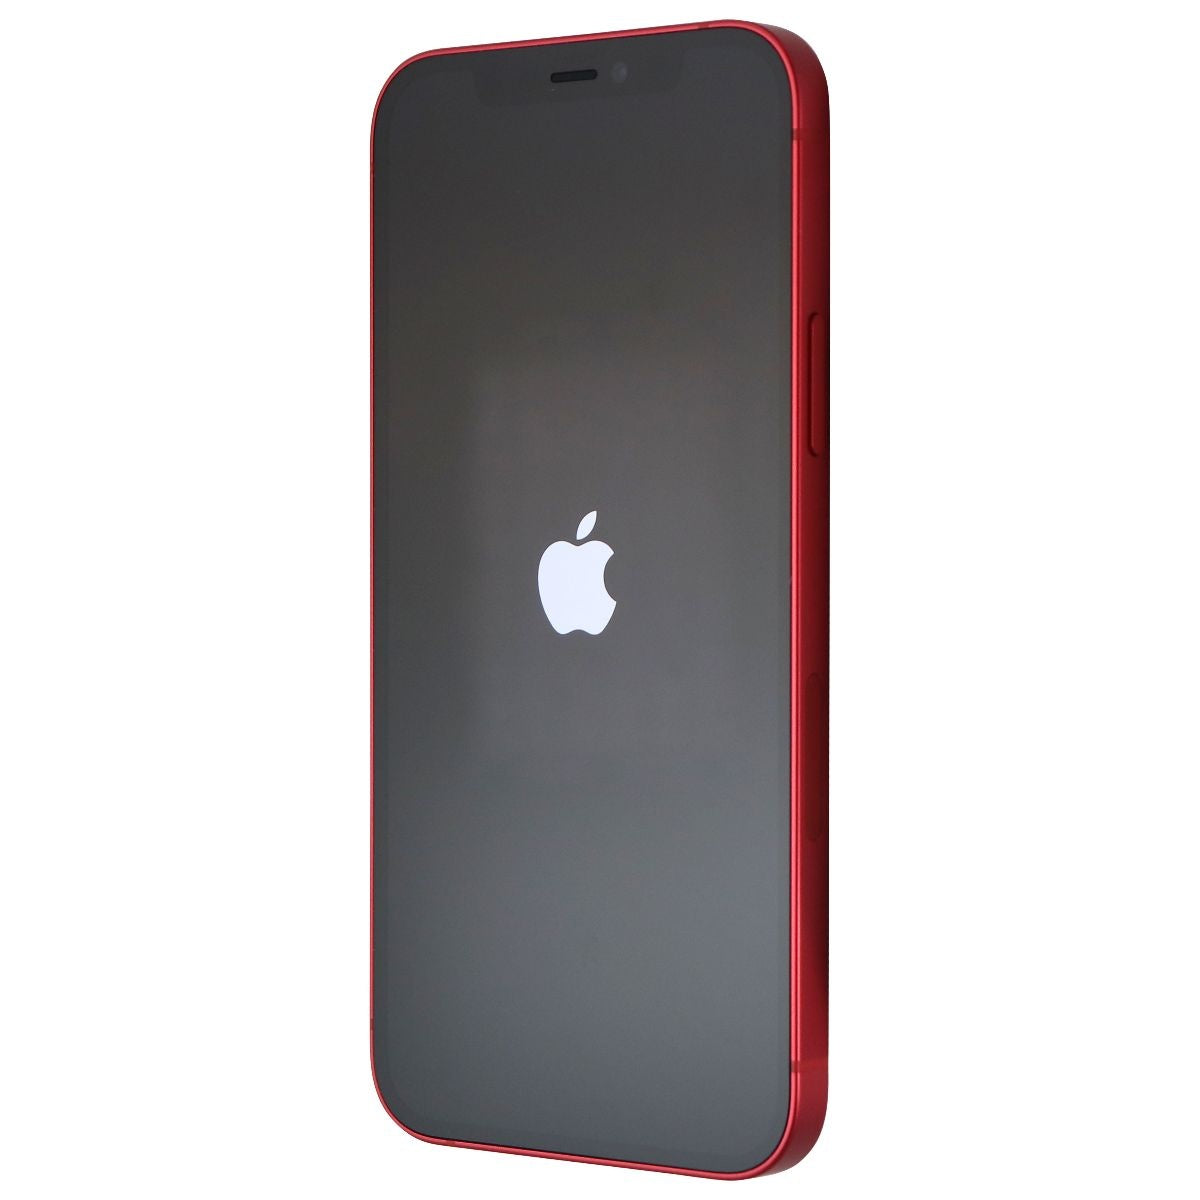 Apple iPhone 12 (6.1-inch) Smartphone (A2172) Unlocked - 64GB / Red